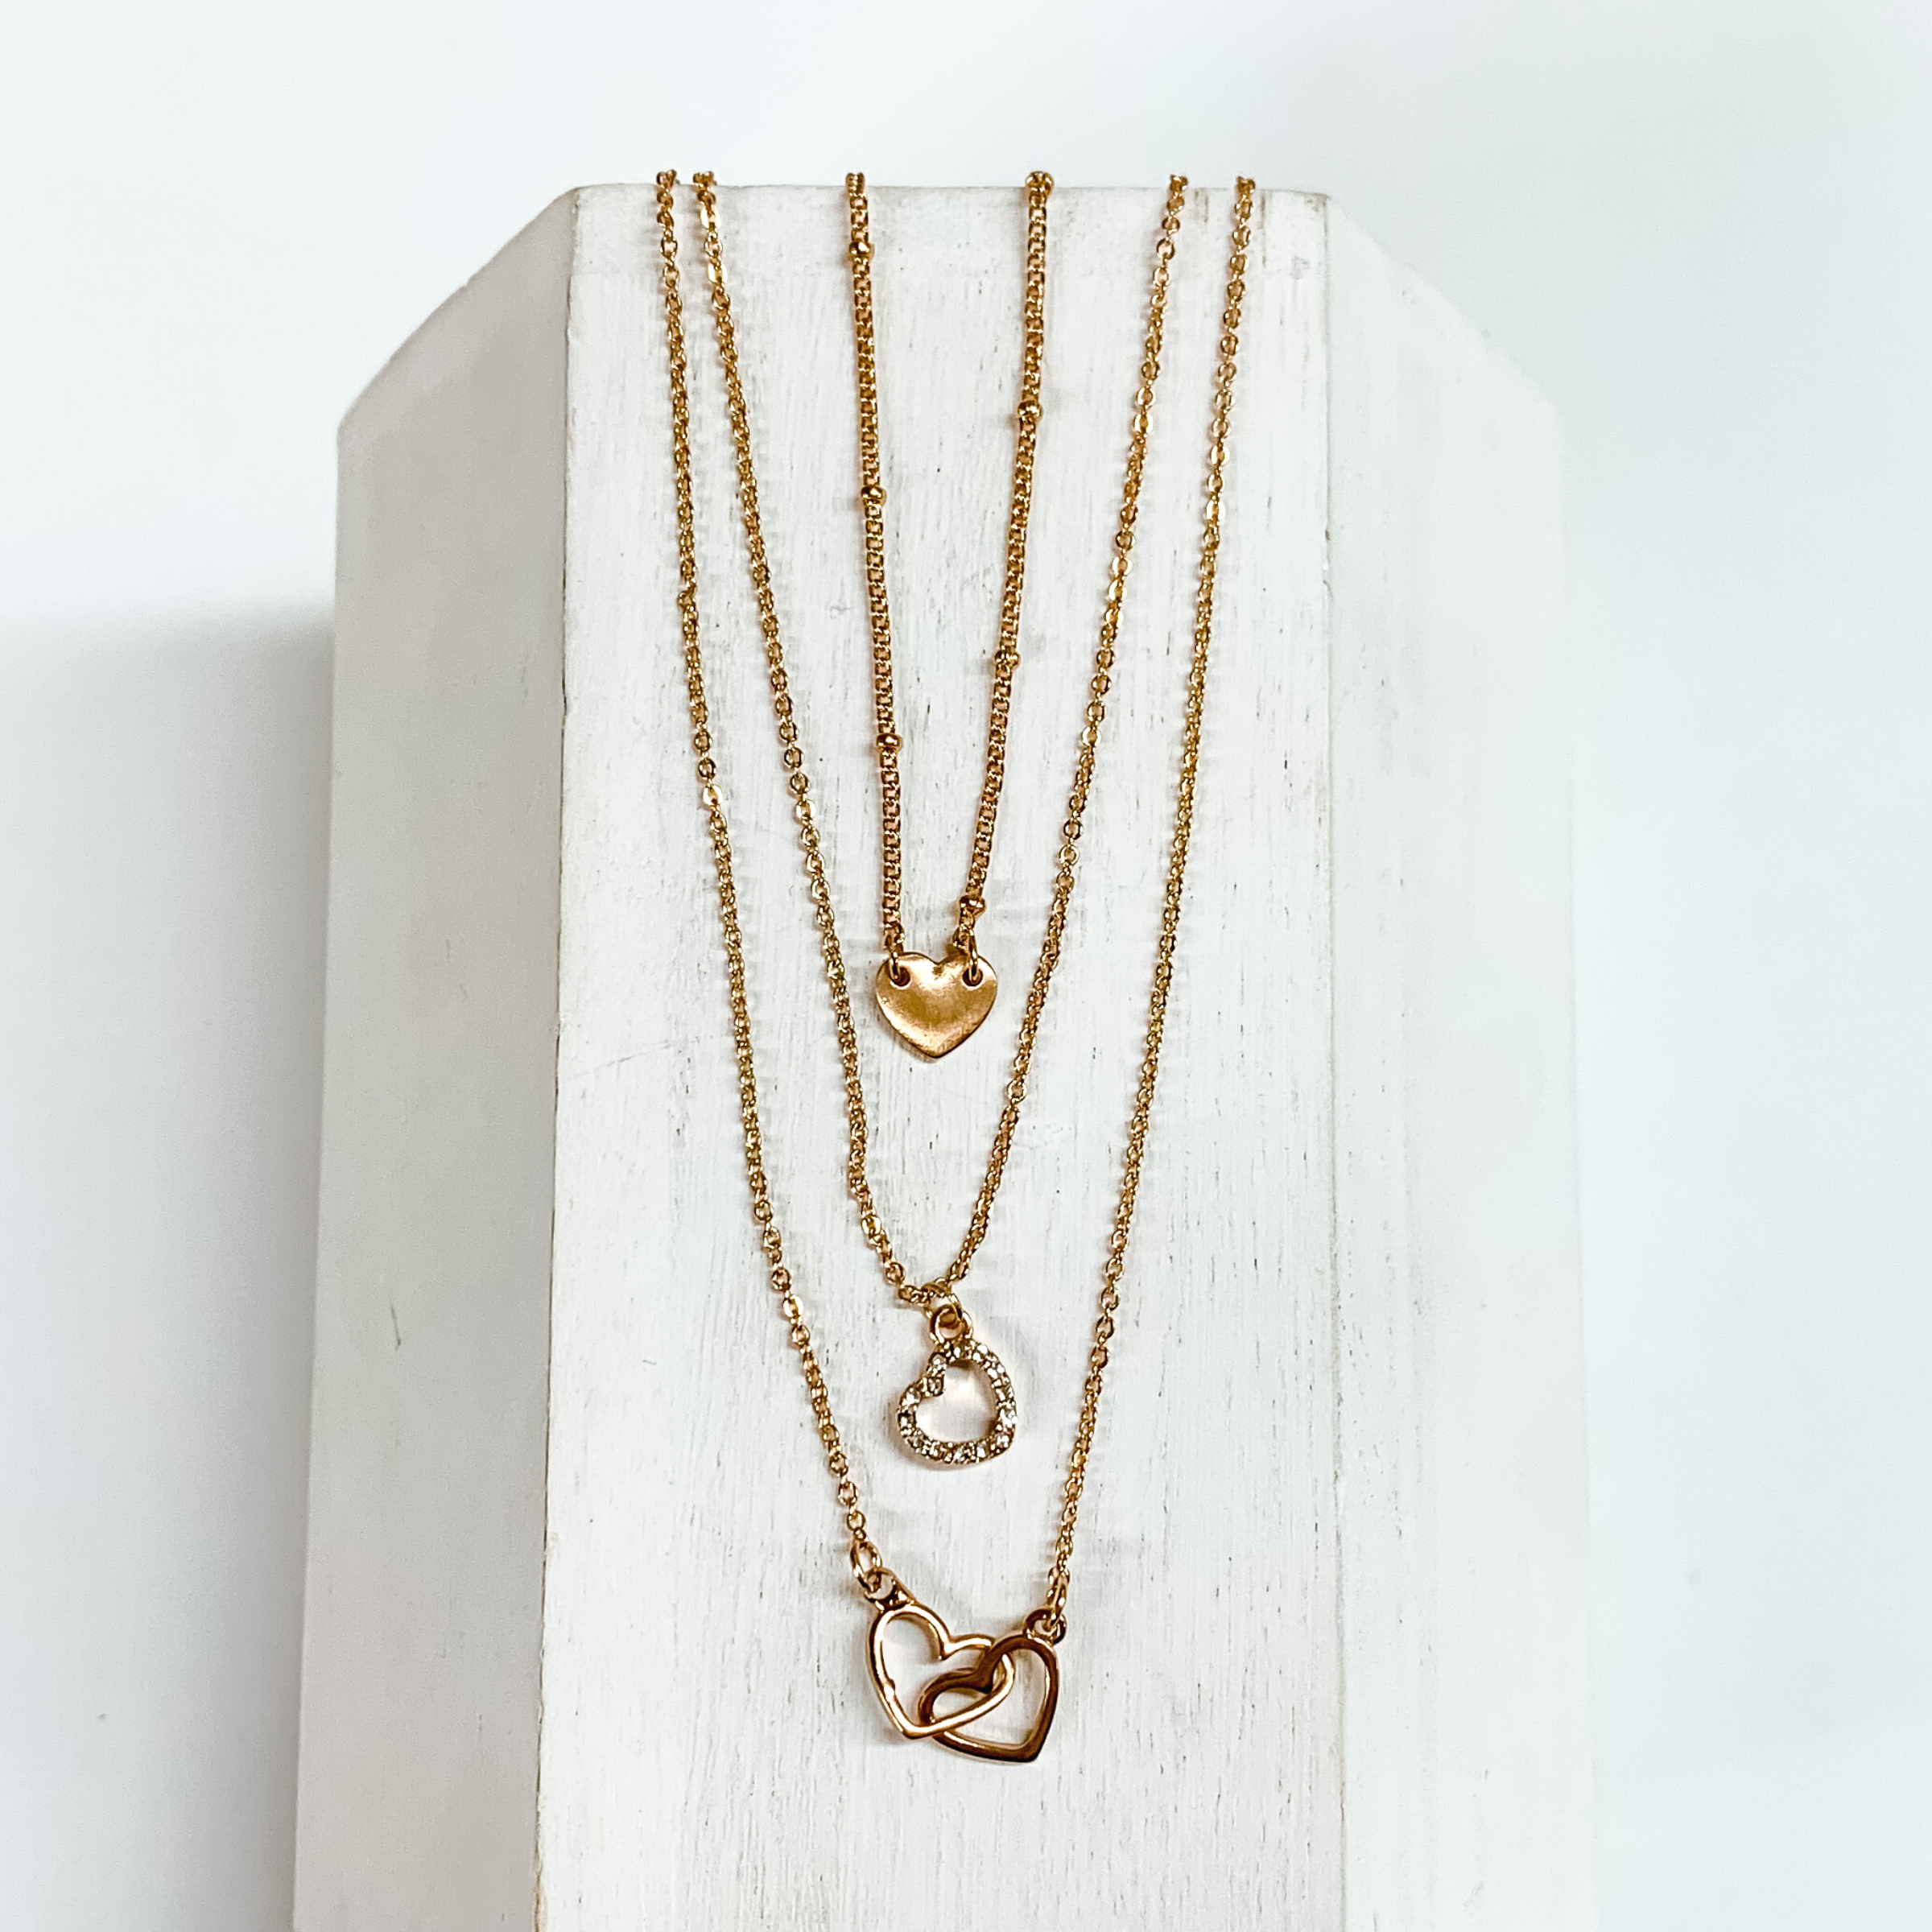 Three gold chain strands each with a heart pendant. The shortest strand has a plain gold heart, medium chain has a heart outline pendant, and the longest strand has two interlocking hearts pendant. This necklace is pictured on a white block on a white background. 